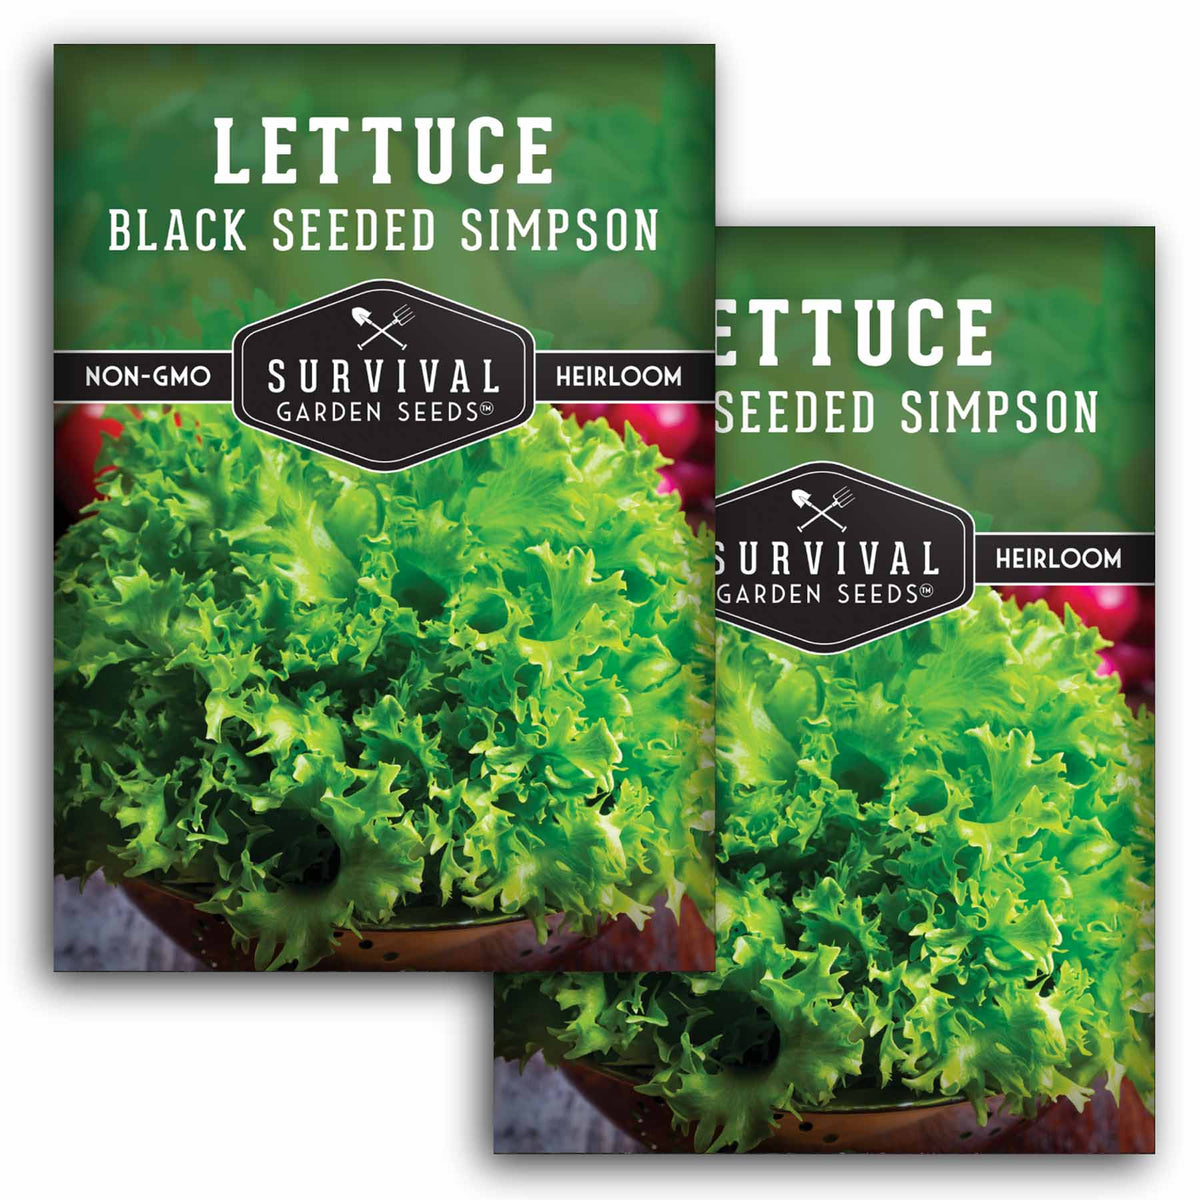 2 packets of Black Seeded Simpson Lettuce seeds